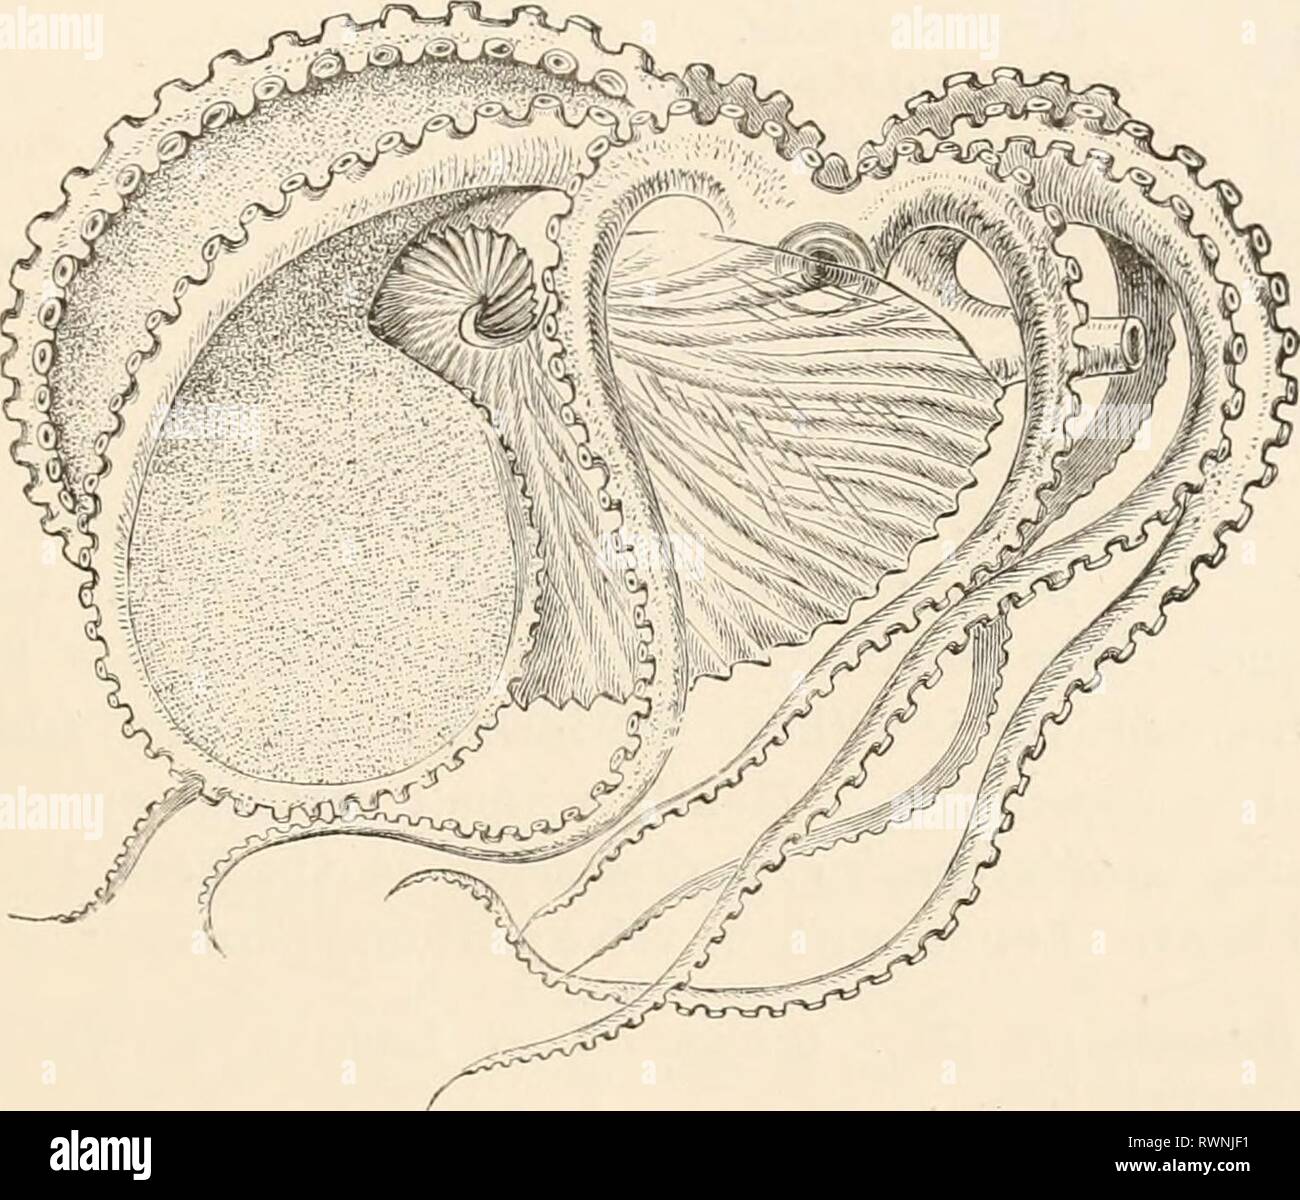 Elementary text-book of zoology (1884) Elementary text-book of zoology elementarytextbo0201clau Year: 1884  ( Kl'HALOPODA. D Fam. Nautilidae. The septa are simply bent and concave towards the anterior chambers. Line of suture simple, with a few large wavy curves or a lateral lobe. Siphon usually central ; shell orifice simple. Ortltnrarfix, shell straight. 0. regularise. Schl., calcareous strata of the North Germ?*! plain. Nautilus, shell coiled. N. pomj&gt;ilii/.-&lt; L., Indian Ocean. Fam. Ammonitidse. The septa much folded at the sides, always with lobe on the outer side, in the middle usua Stock Photo